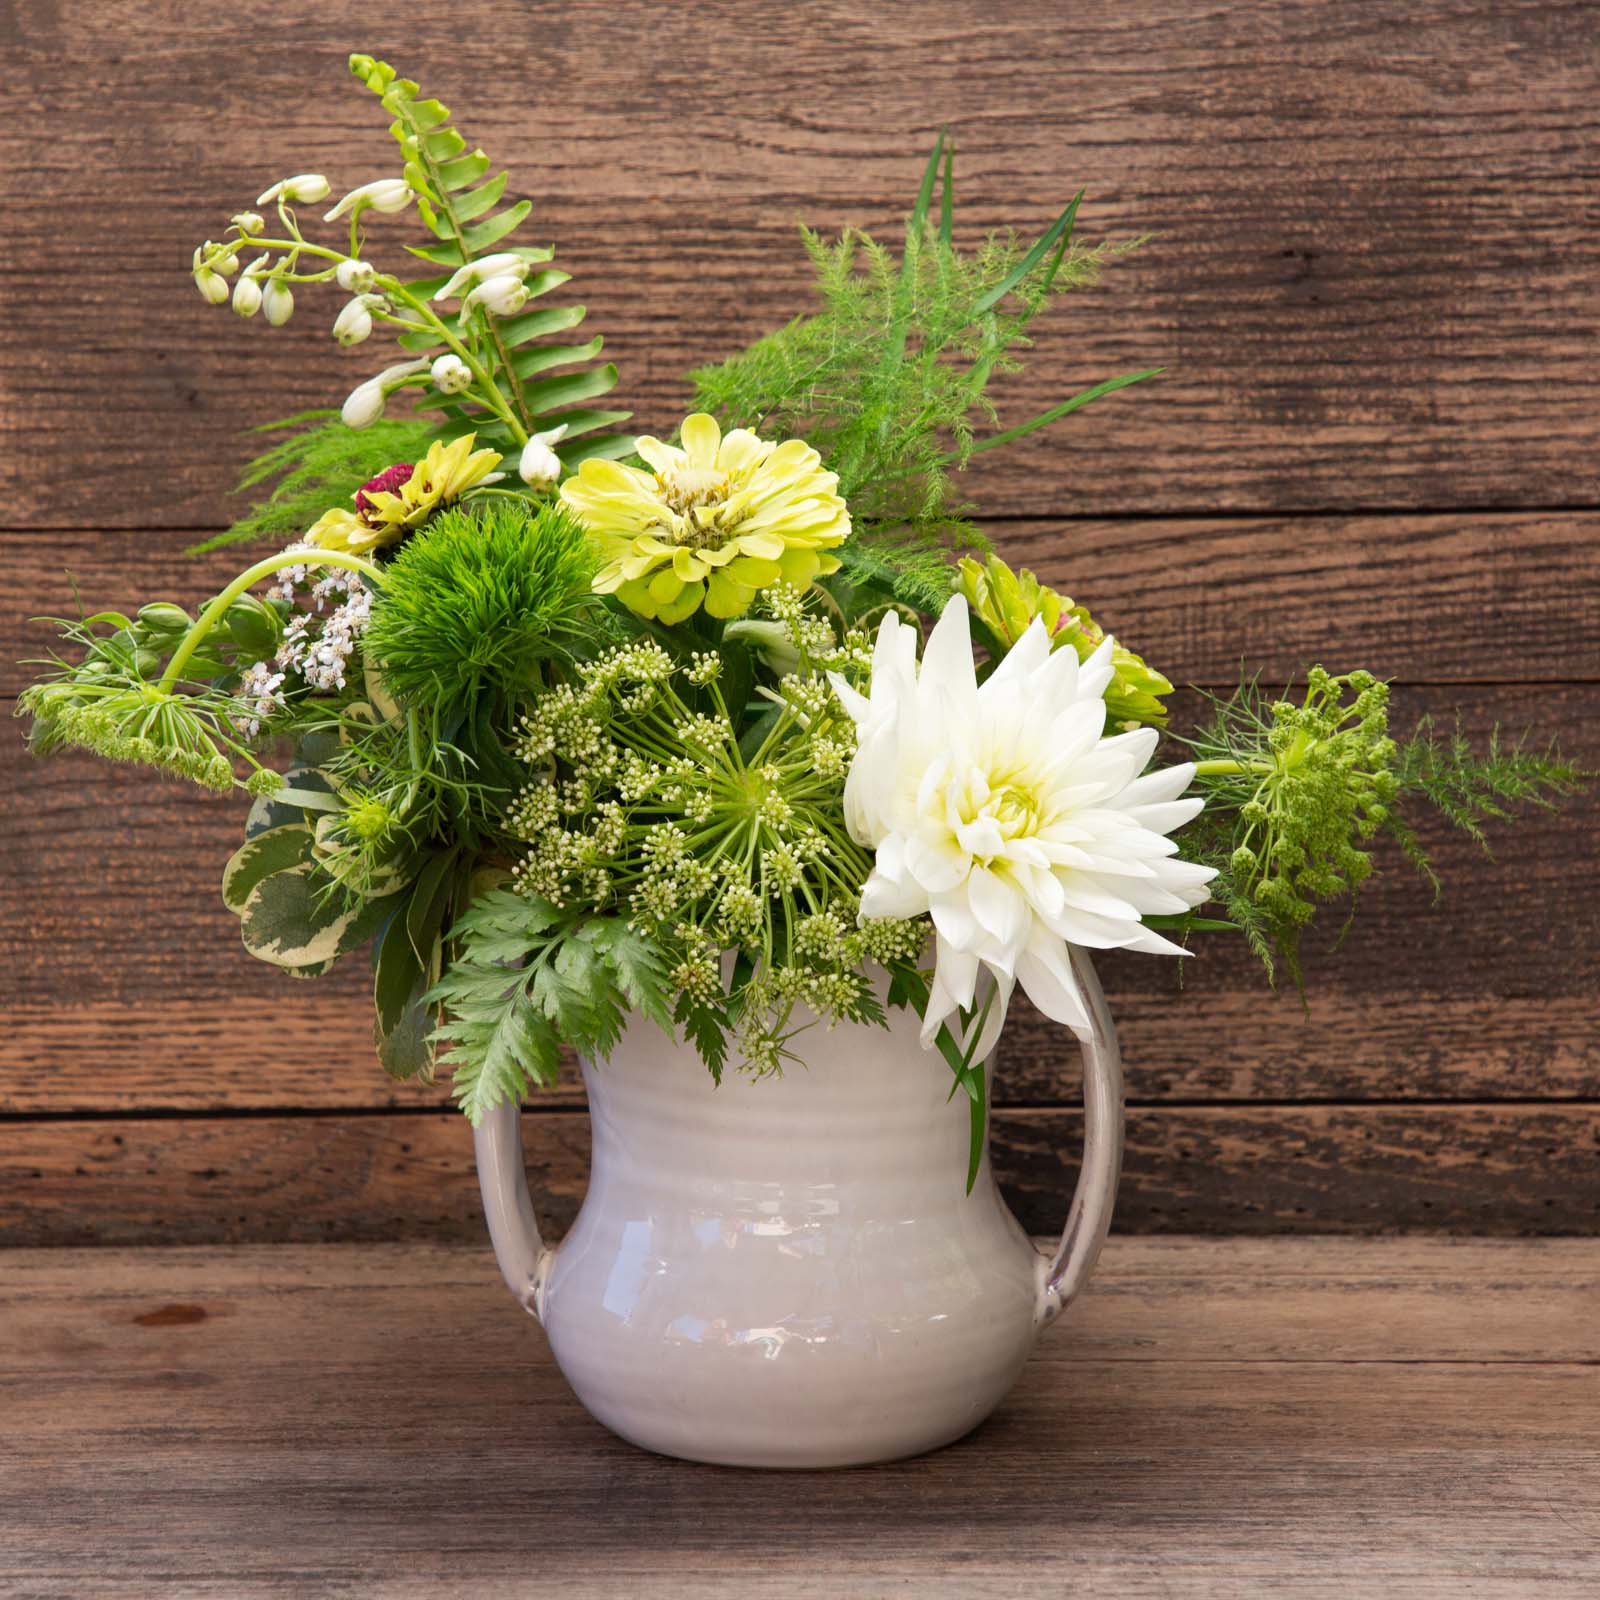 White ceramic vase filled with green and white flowers (zinnias, dahlia, fern fronds and other foliage).